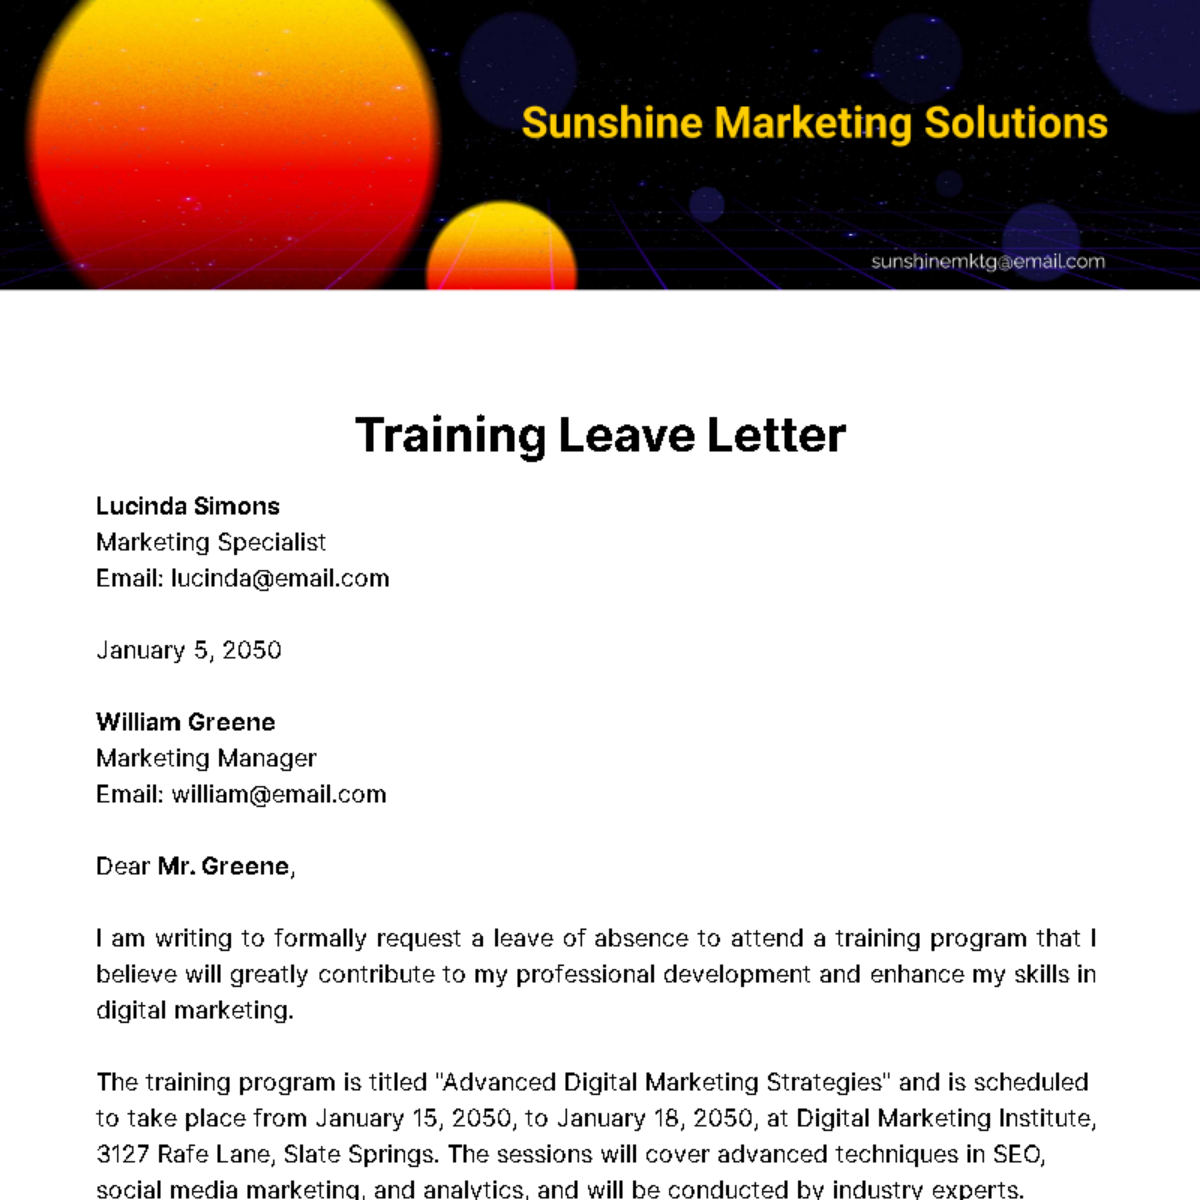 Training Leave Letter Template